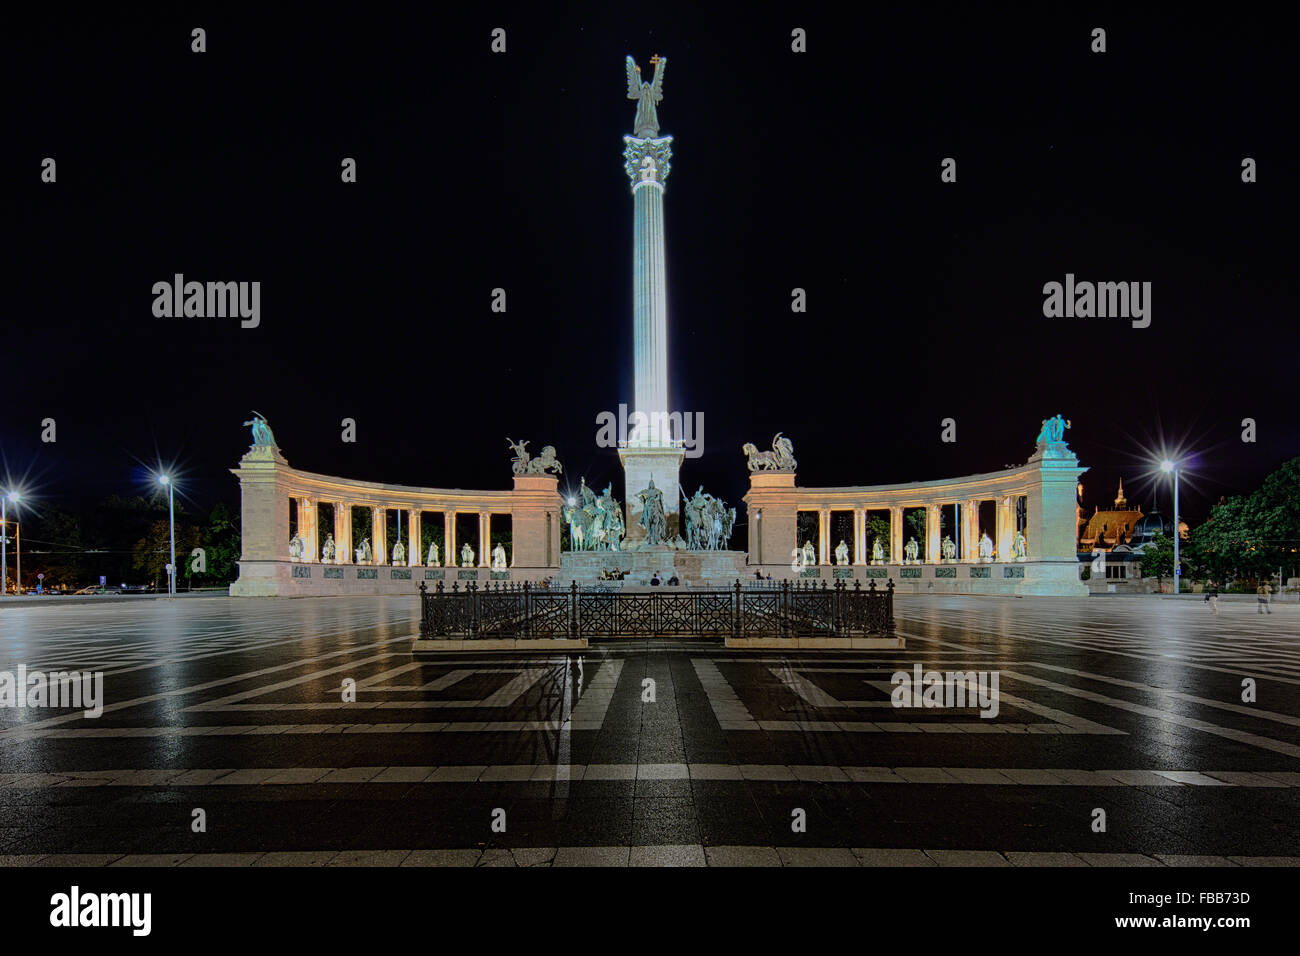 Low Angle View of the Hero's Square with the a Column and Colonnades, at Night, Budapest, Hungary Stock Photo